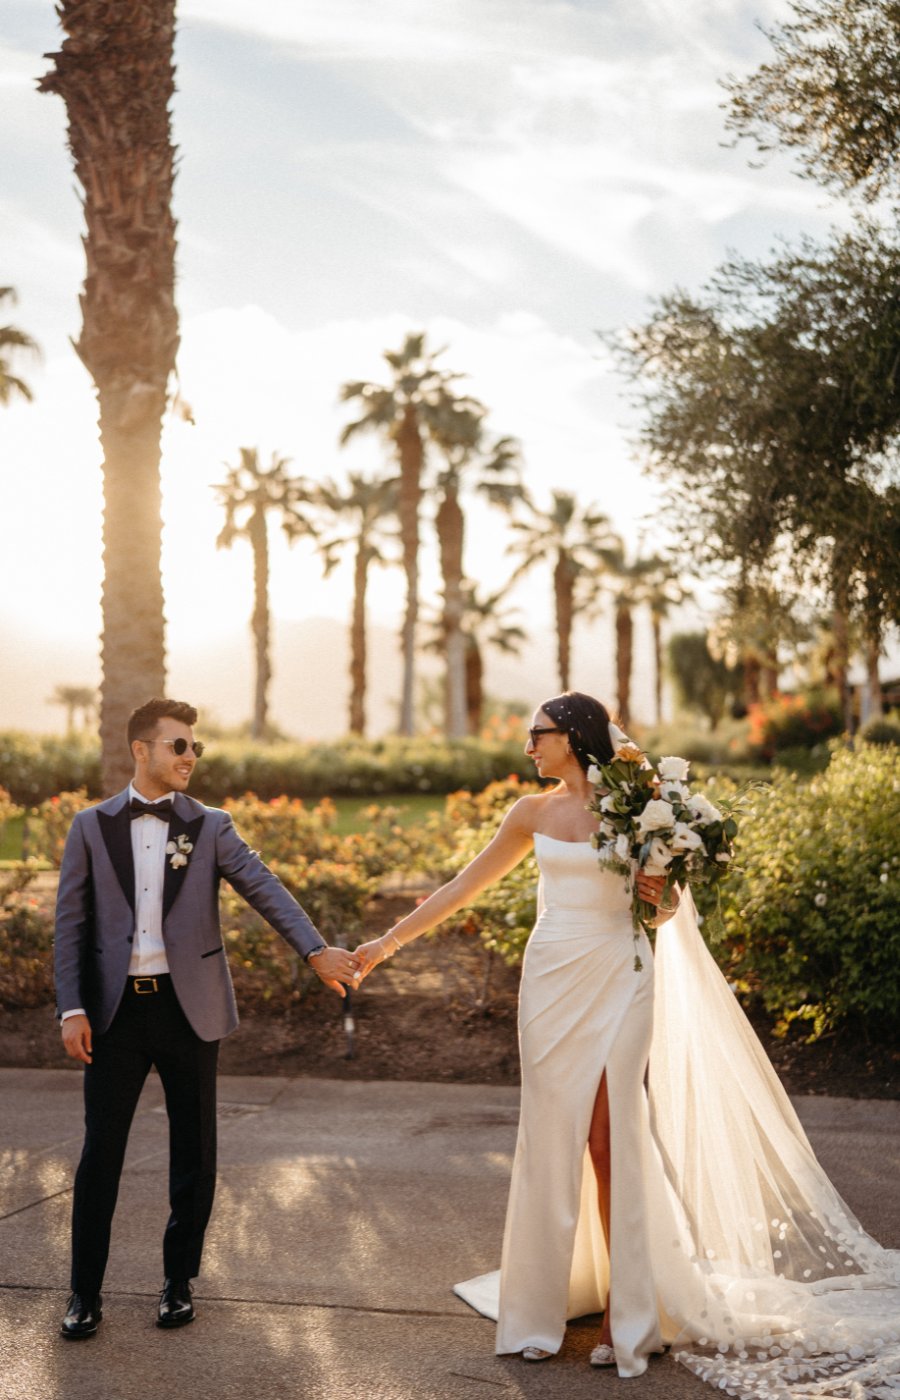 Bride and groom holding hands in Palm Desert during a sunset.